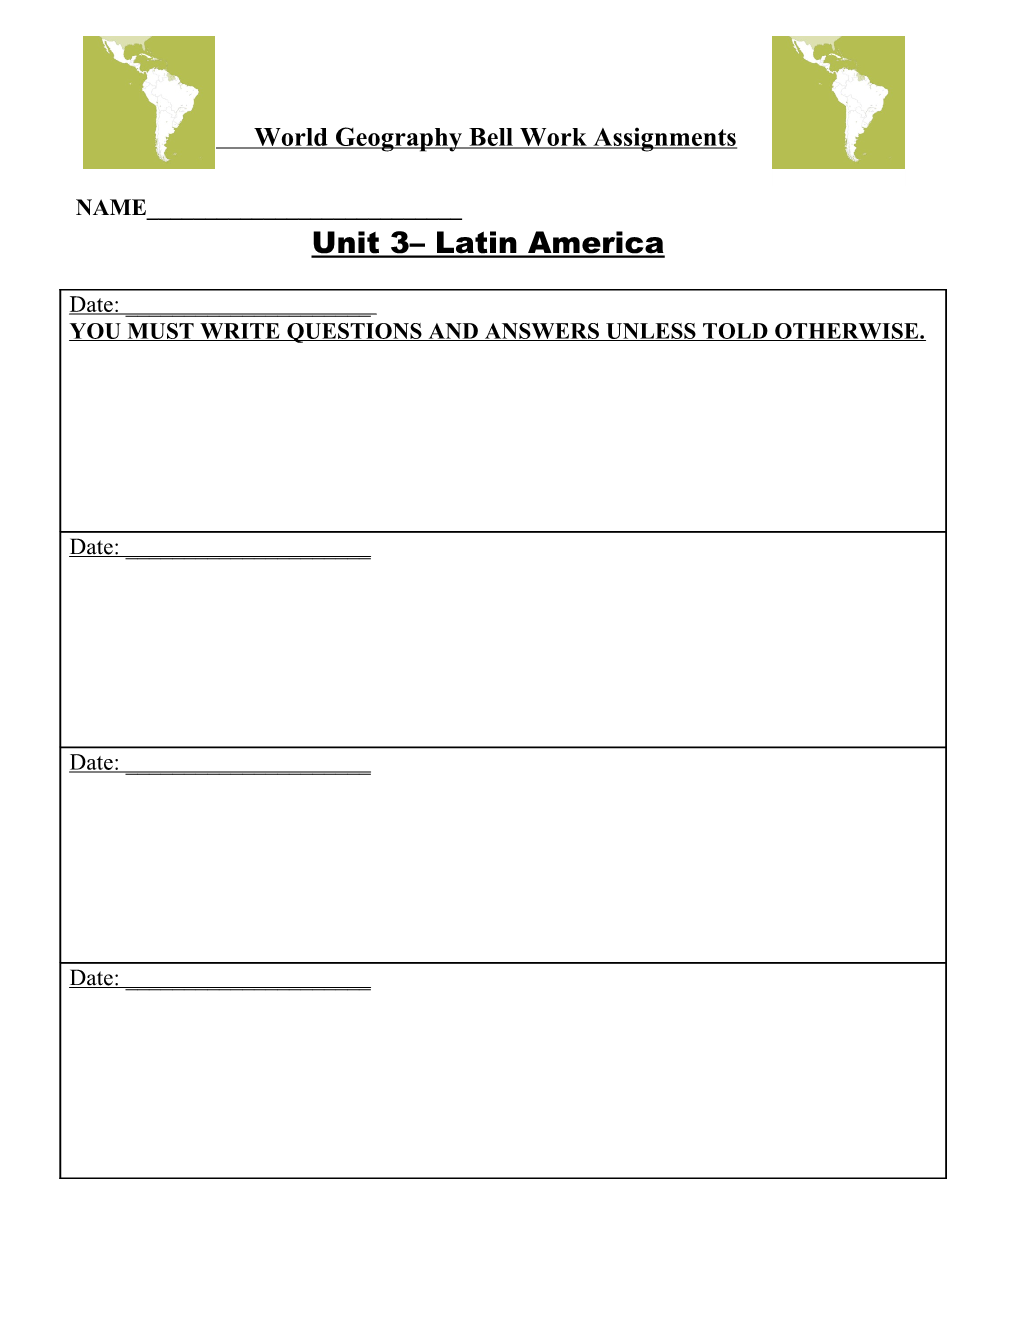 American History Bell Work Assignments